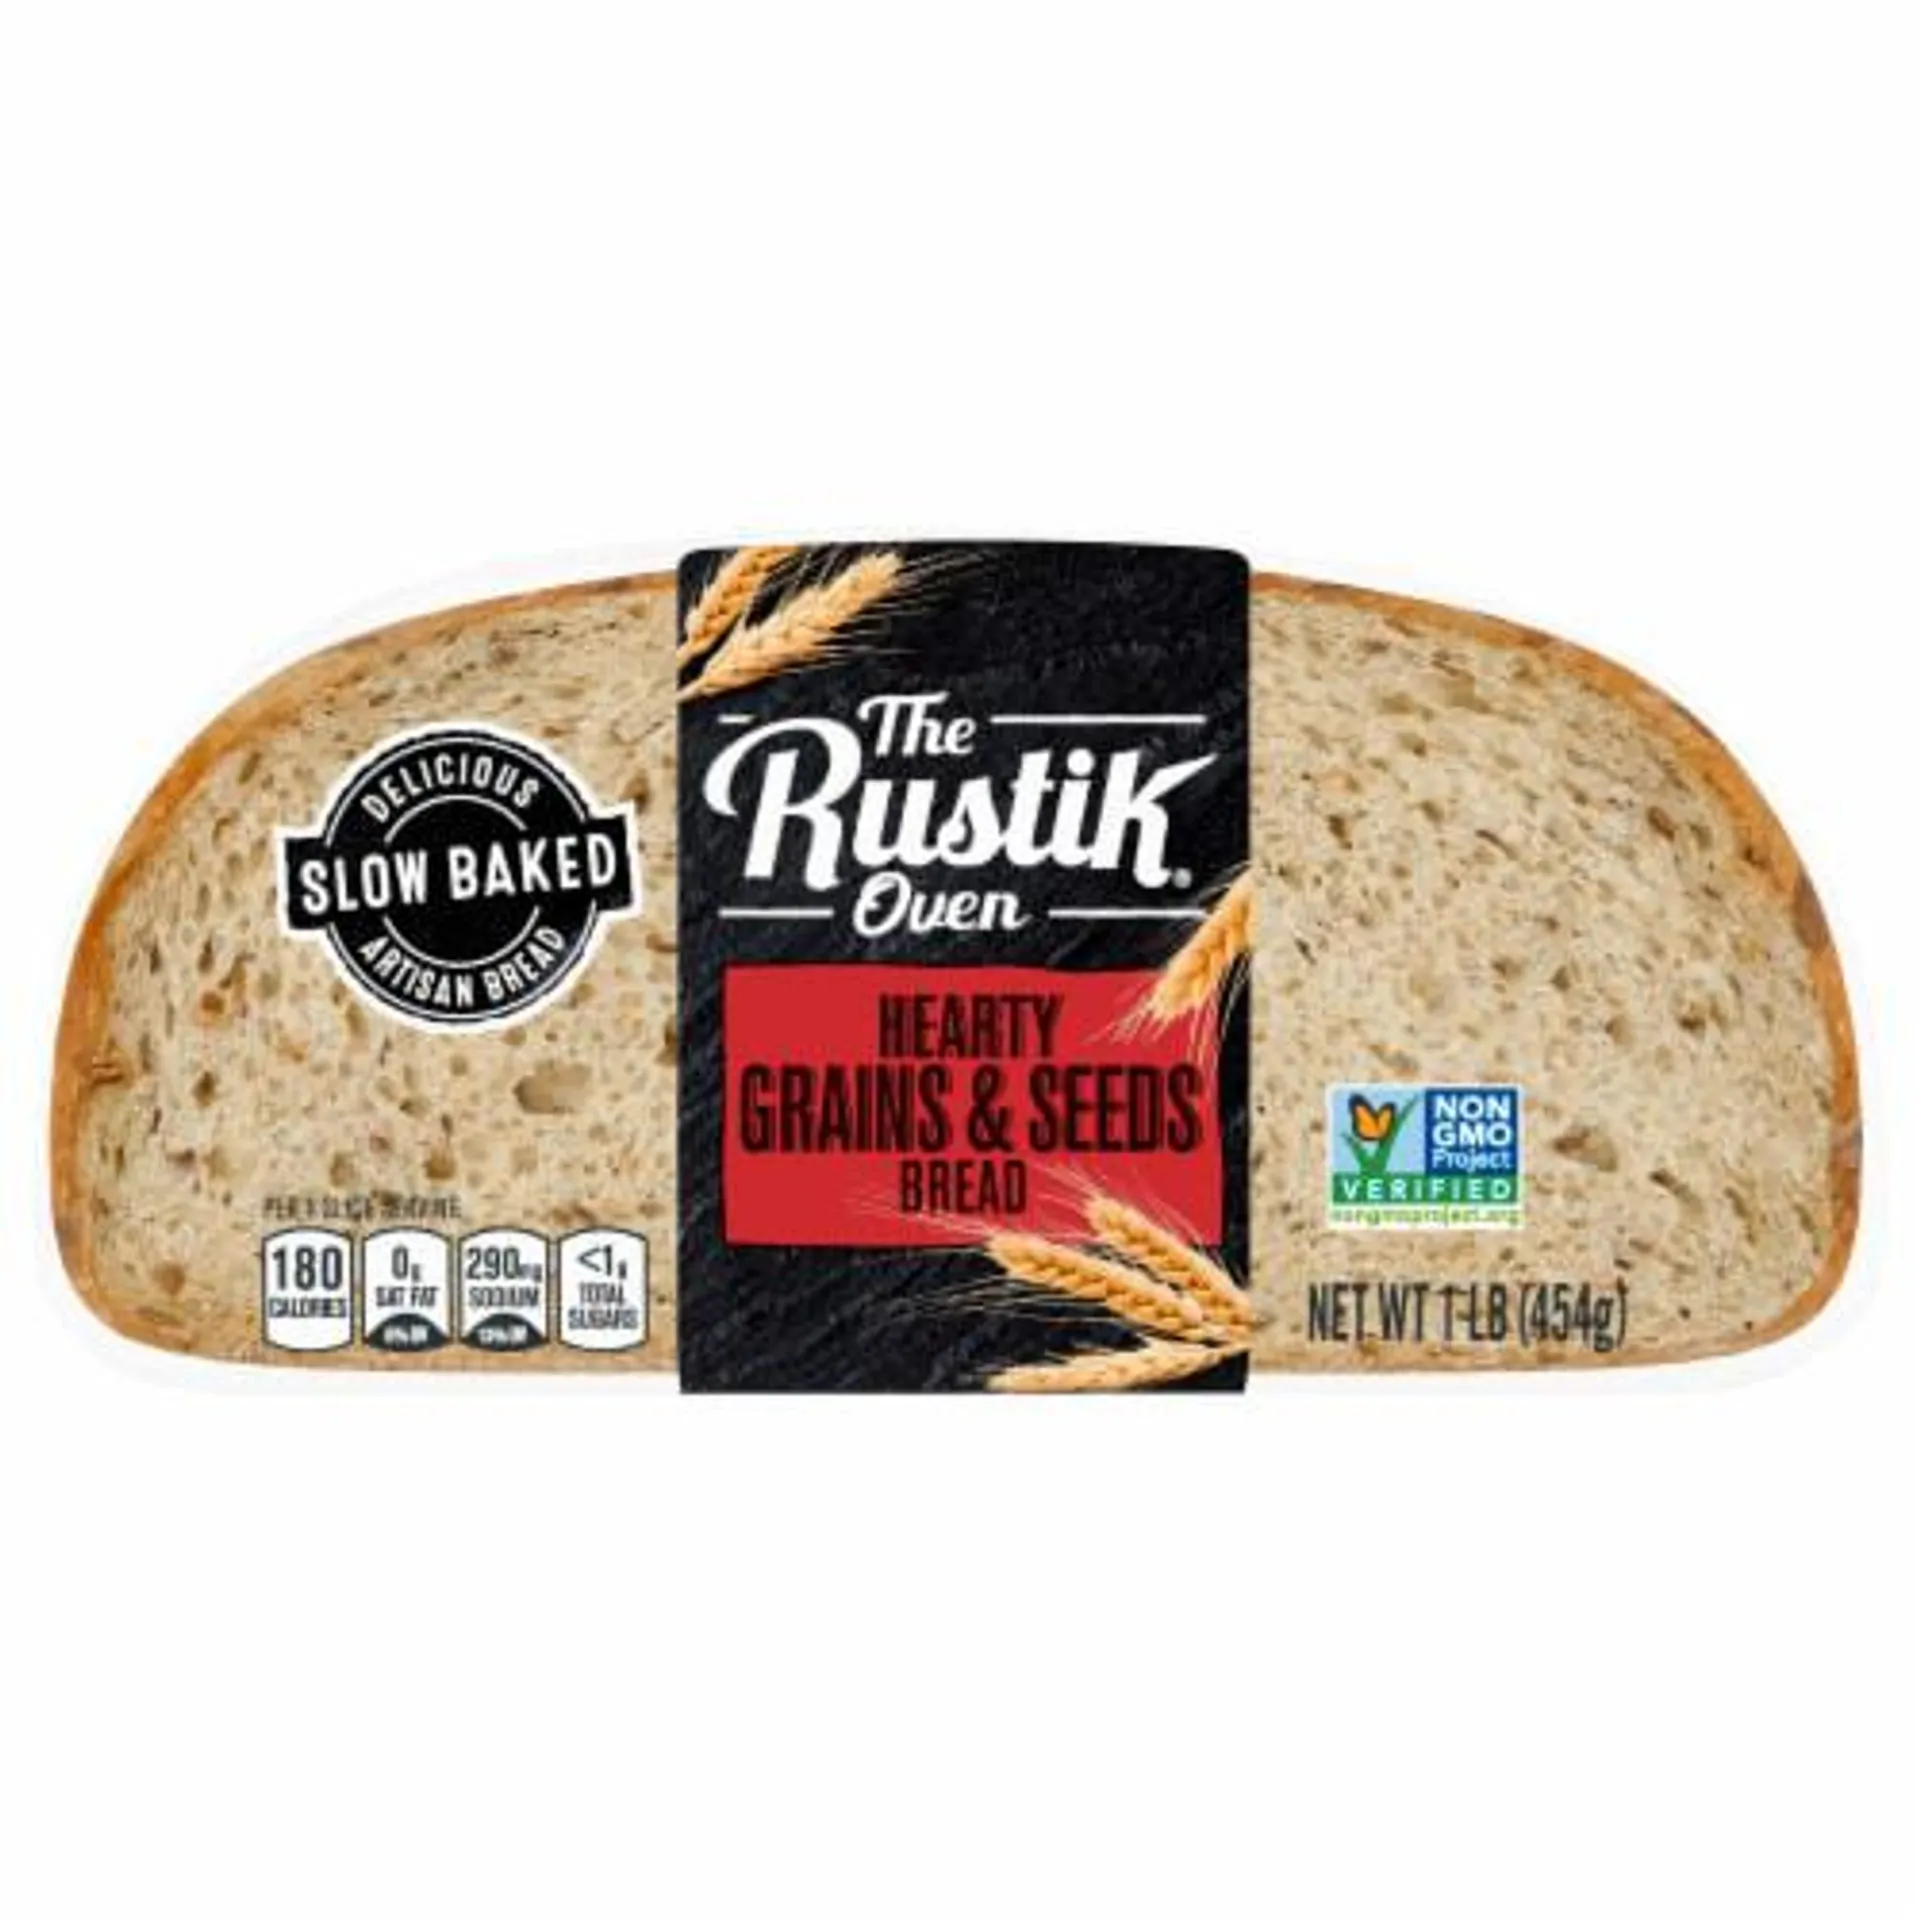 The Rustik Oven® Hearty Grains & Seeds Bread